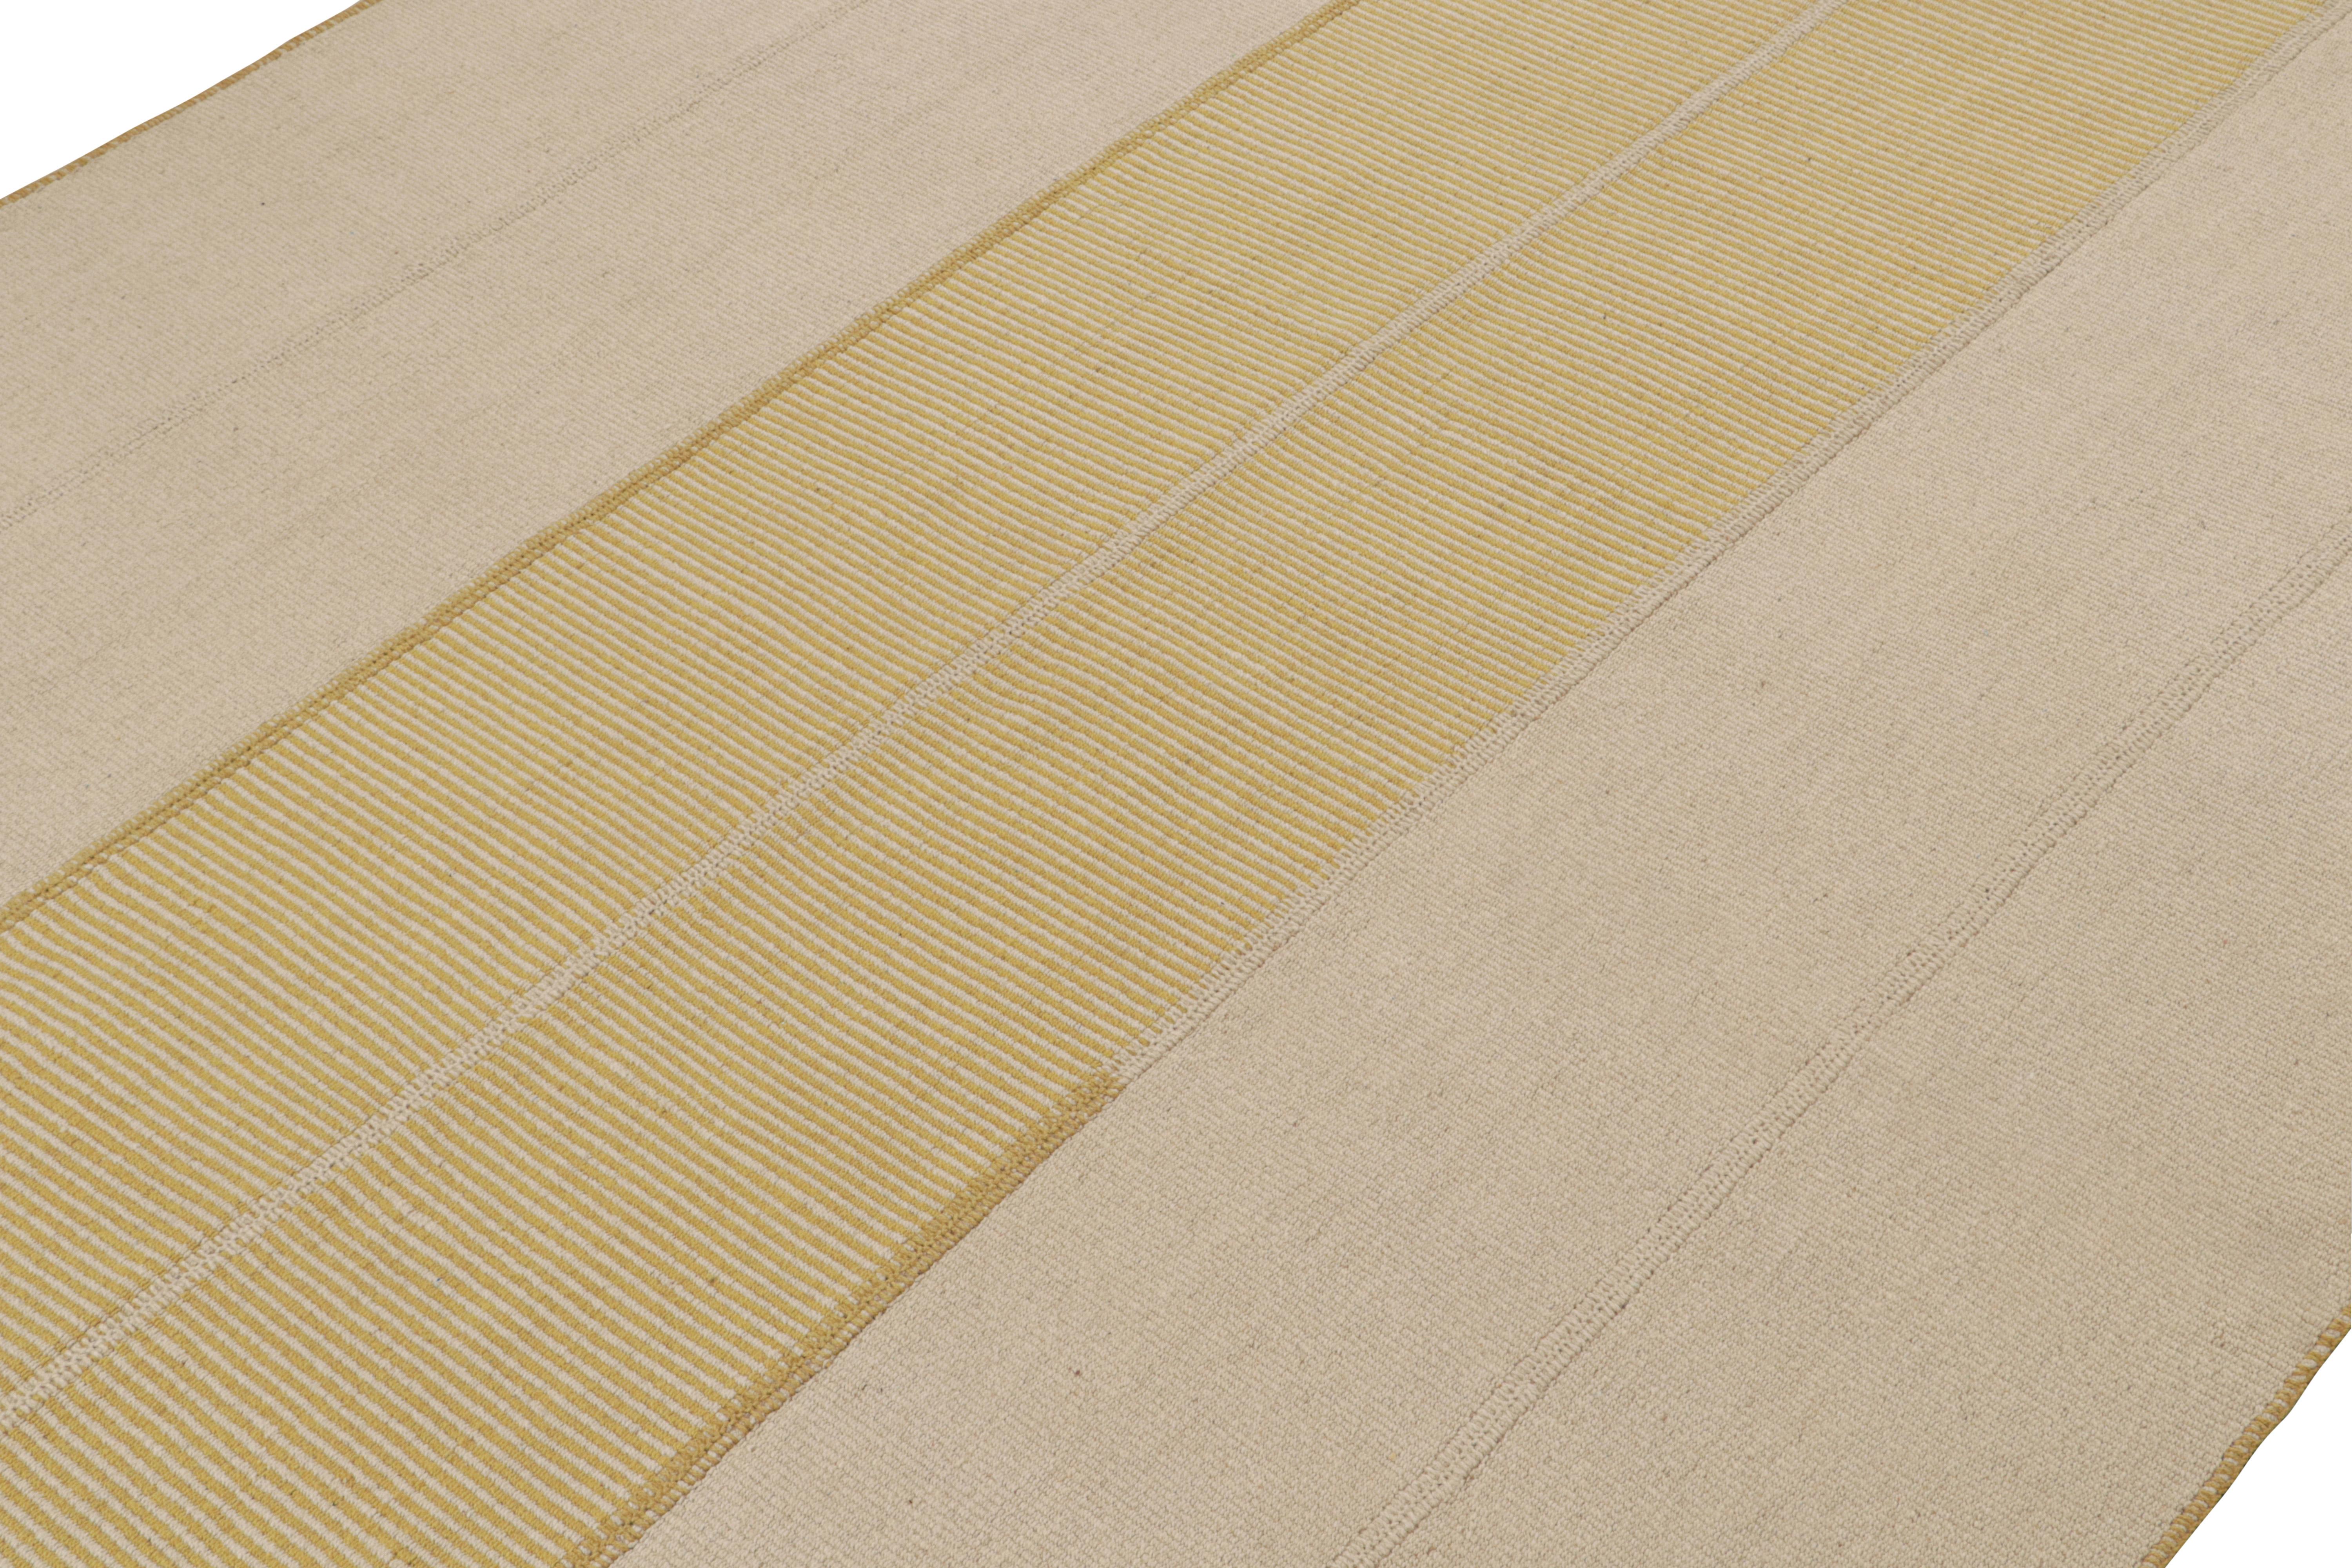 Handwoven in wool, a 10x14 Kilim from a bold new line of contemporary flatweaves by Rug & Kilim.

On the Design: 

Connoting a modern take on classic panel-weaving, our latest “Rez Kilim” enjoys beige & gold tones. Keen eyes will admire how this